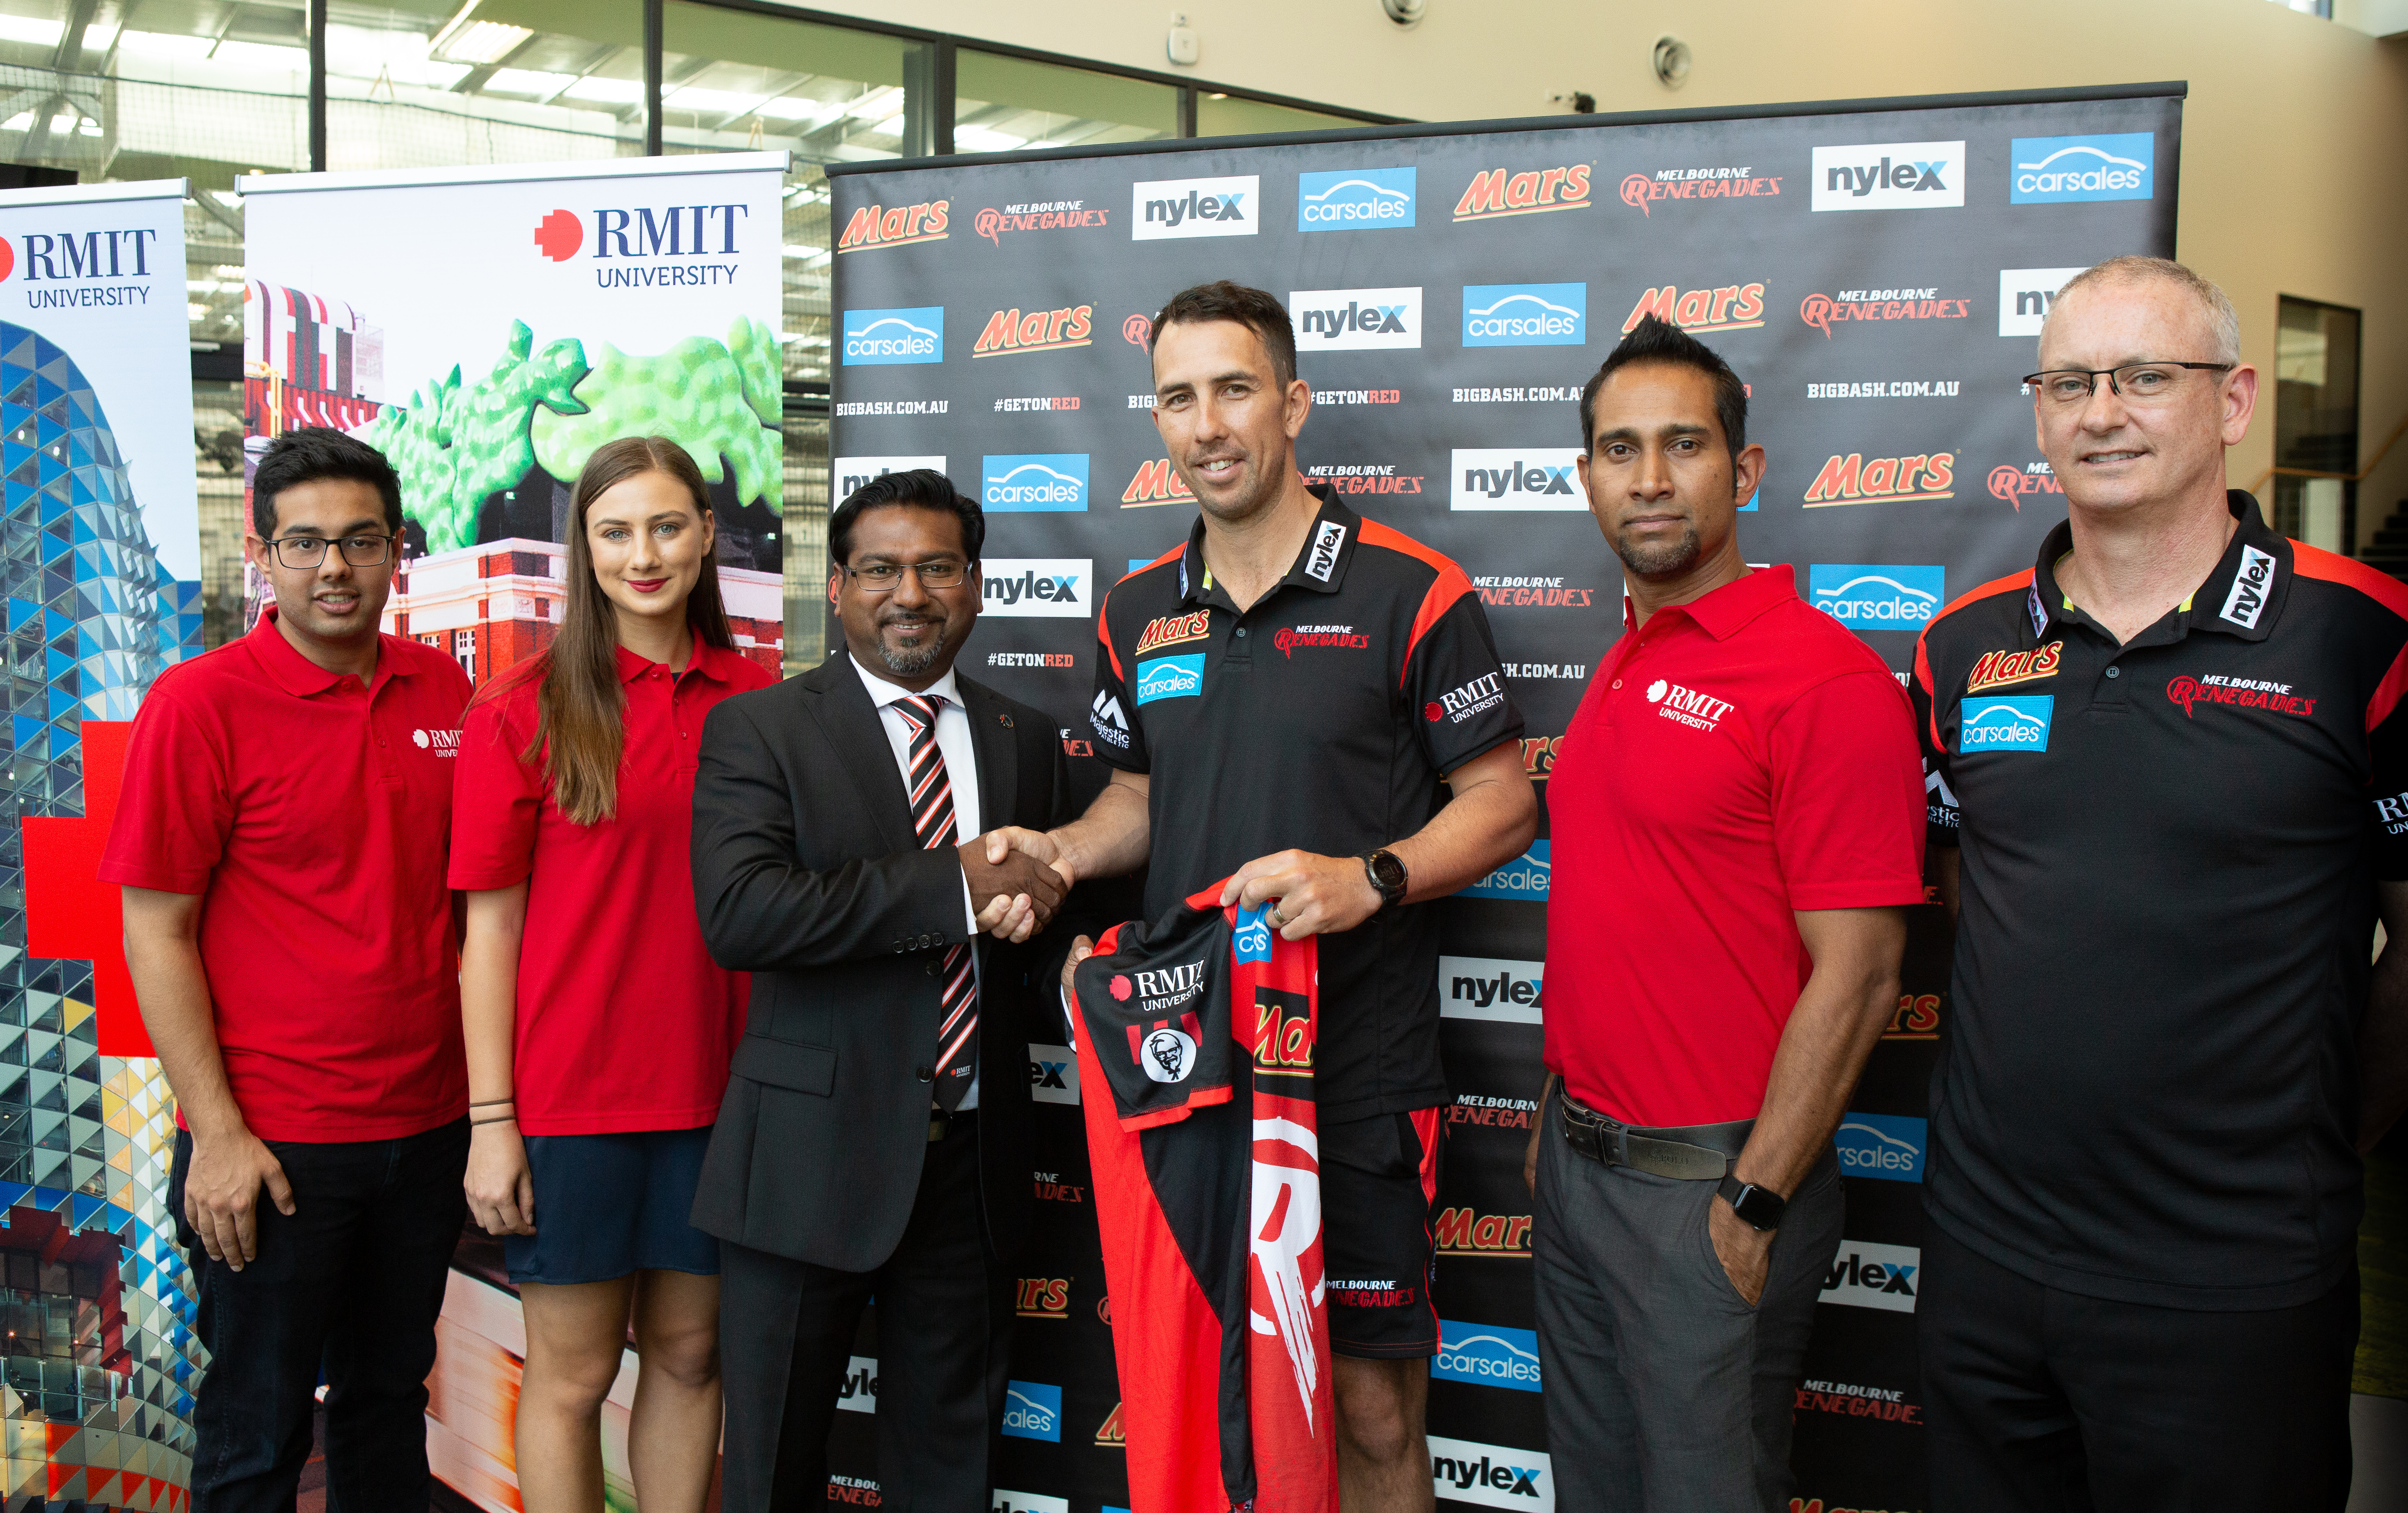 Melbourne Renegades vice-captain Tom Cooper shows off the new playing kit featuring the RMIT logo. From left: student ambassadors Abhinay Kathuria and Georgia Rajic, RMIT CMO Chaminda Ranasinghe, Tom Cooper, Prof John Thangarajah and Melbourne Renegades CEO Stuart Coventry